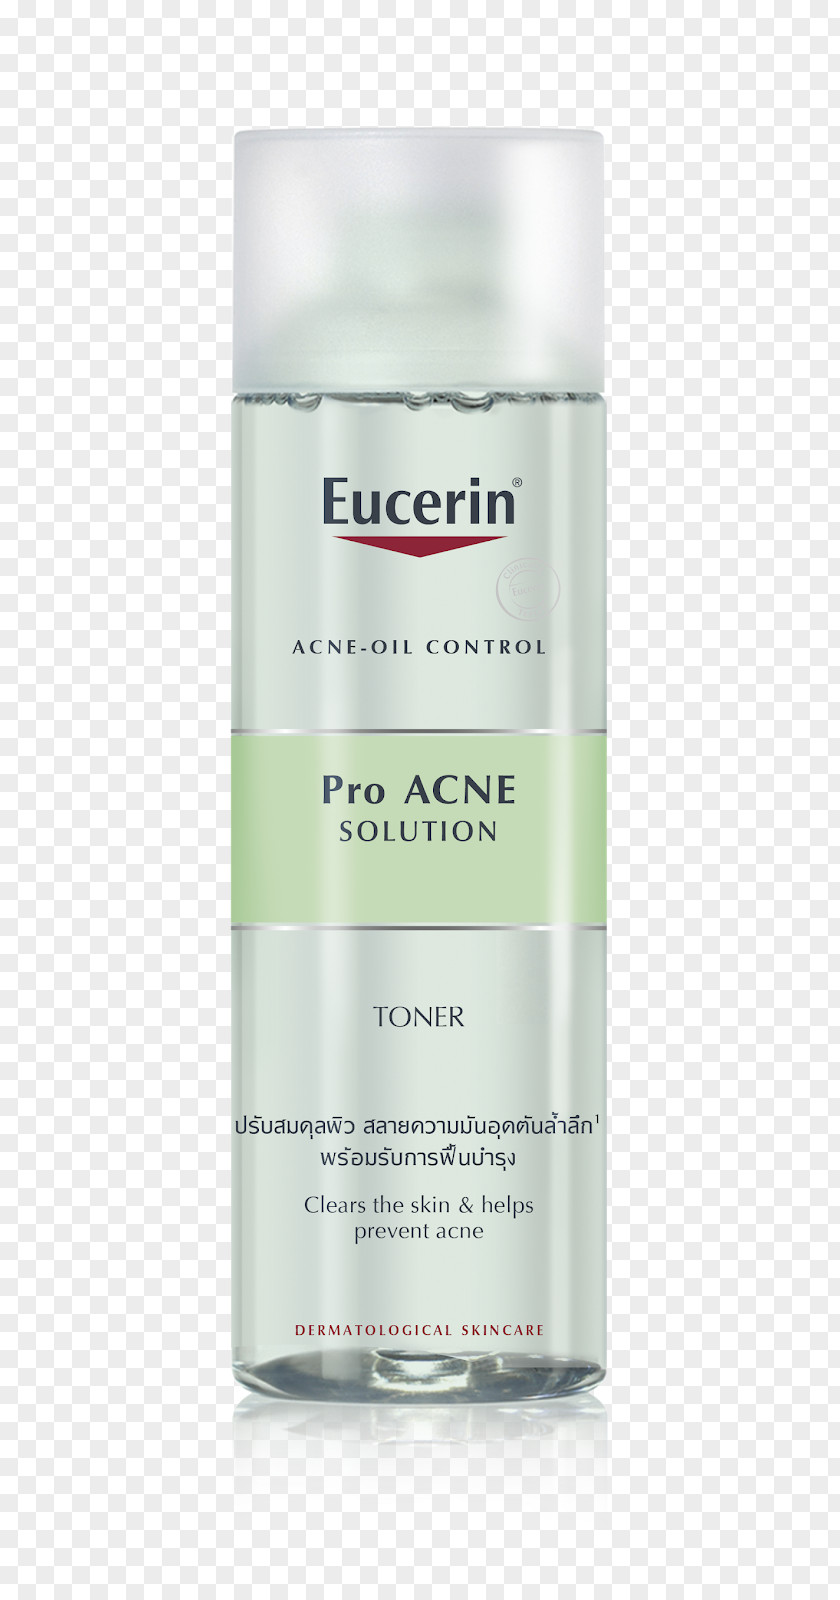 Eucerin ProACNE Solution Toner Cleanser Micelle Skin PNG